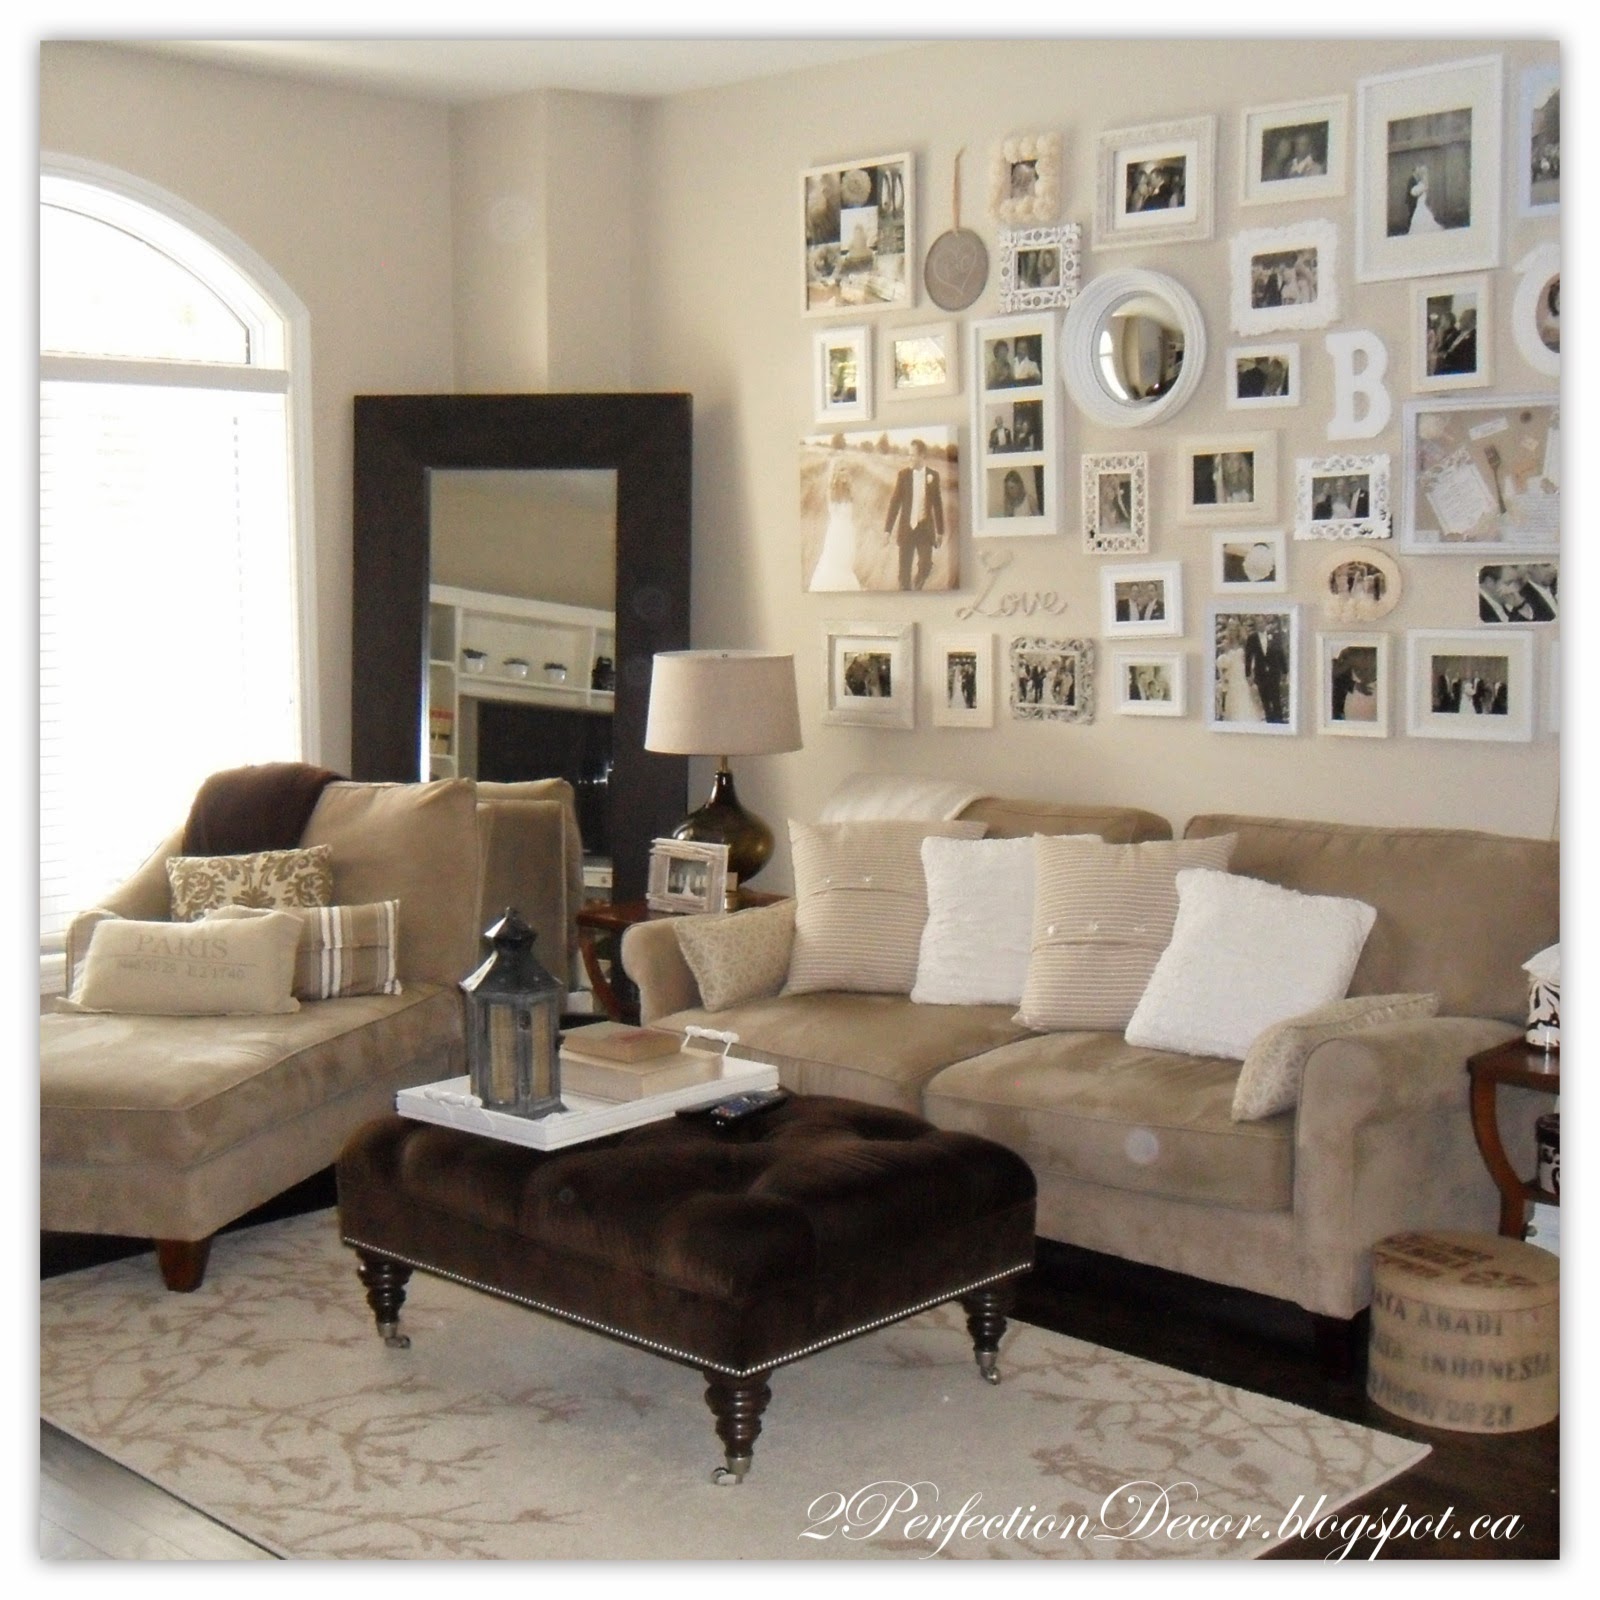 2Perfection Decor: Family Room Reveal